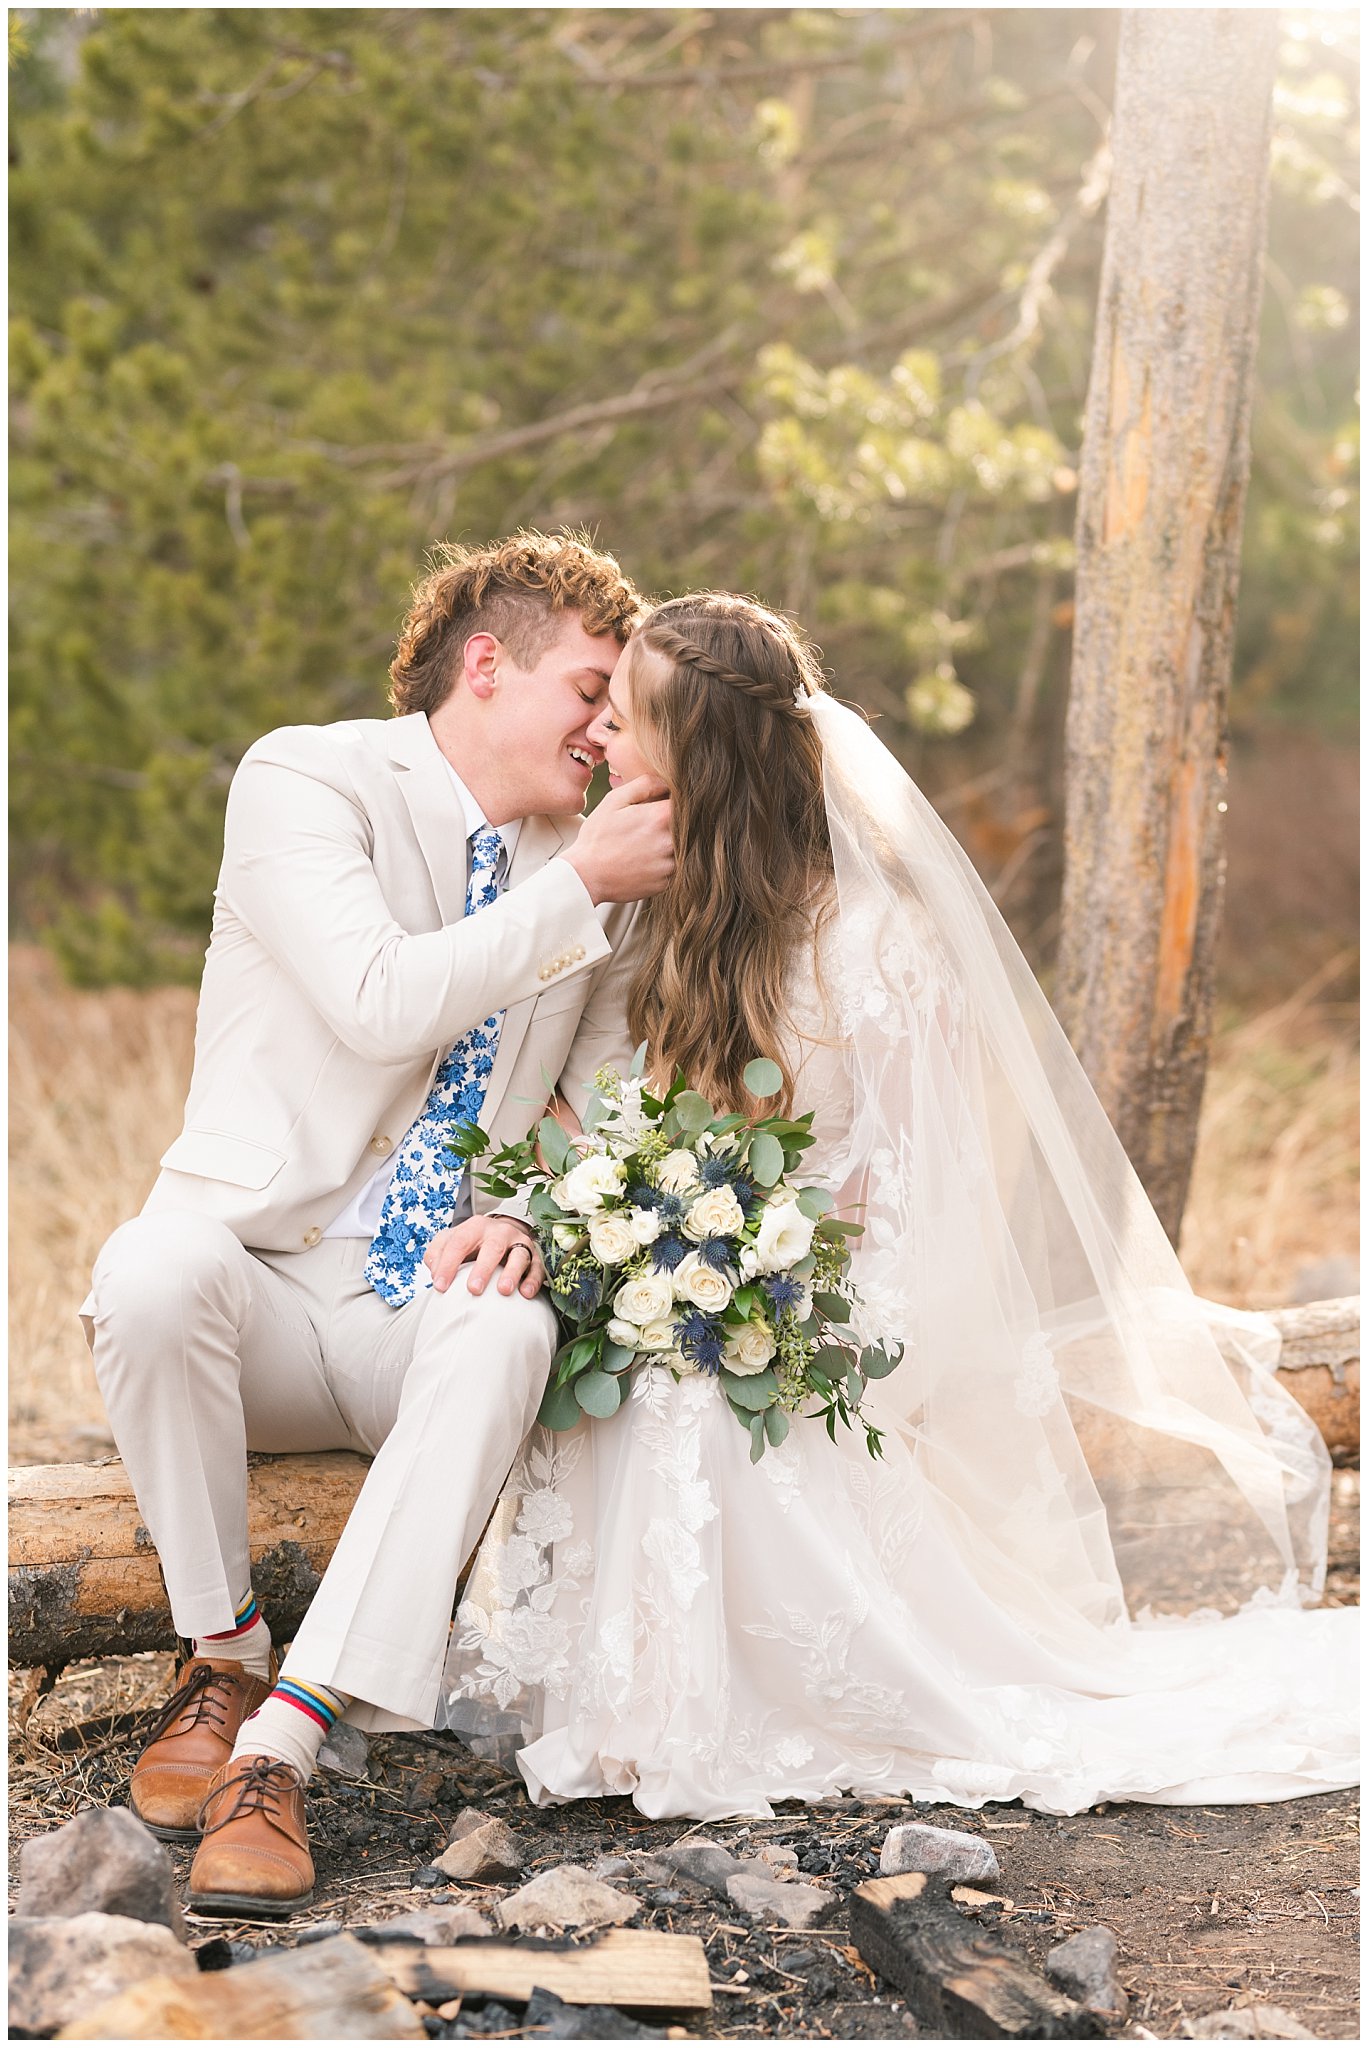 Bride and groom in the mountains wearing lace dress with veil and white floral bouquet and creme colored suit with blue tie | Tibble Fork Winter Formal Session | Jessie and Dallin Photography